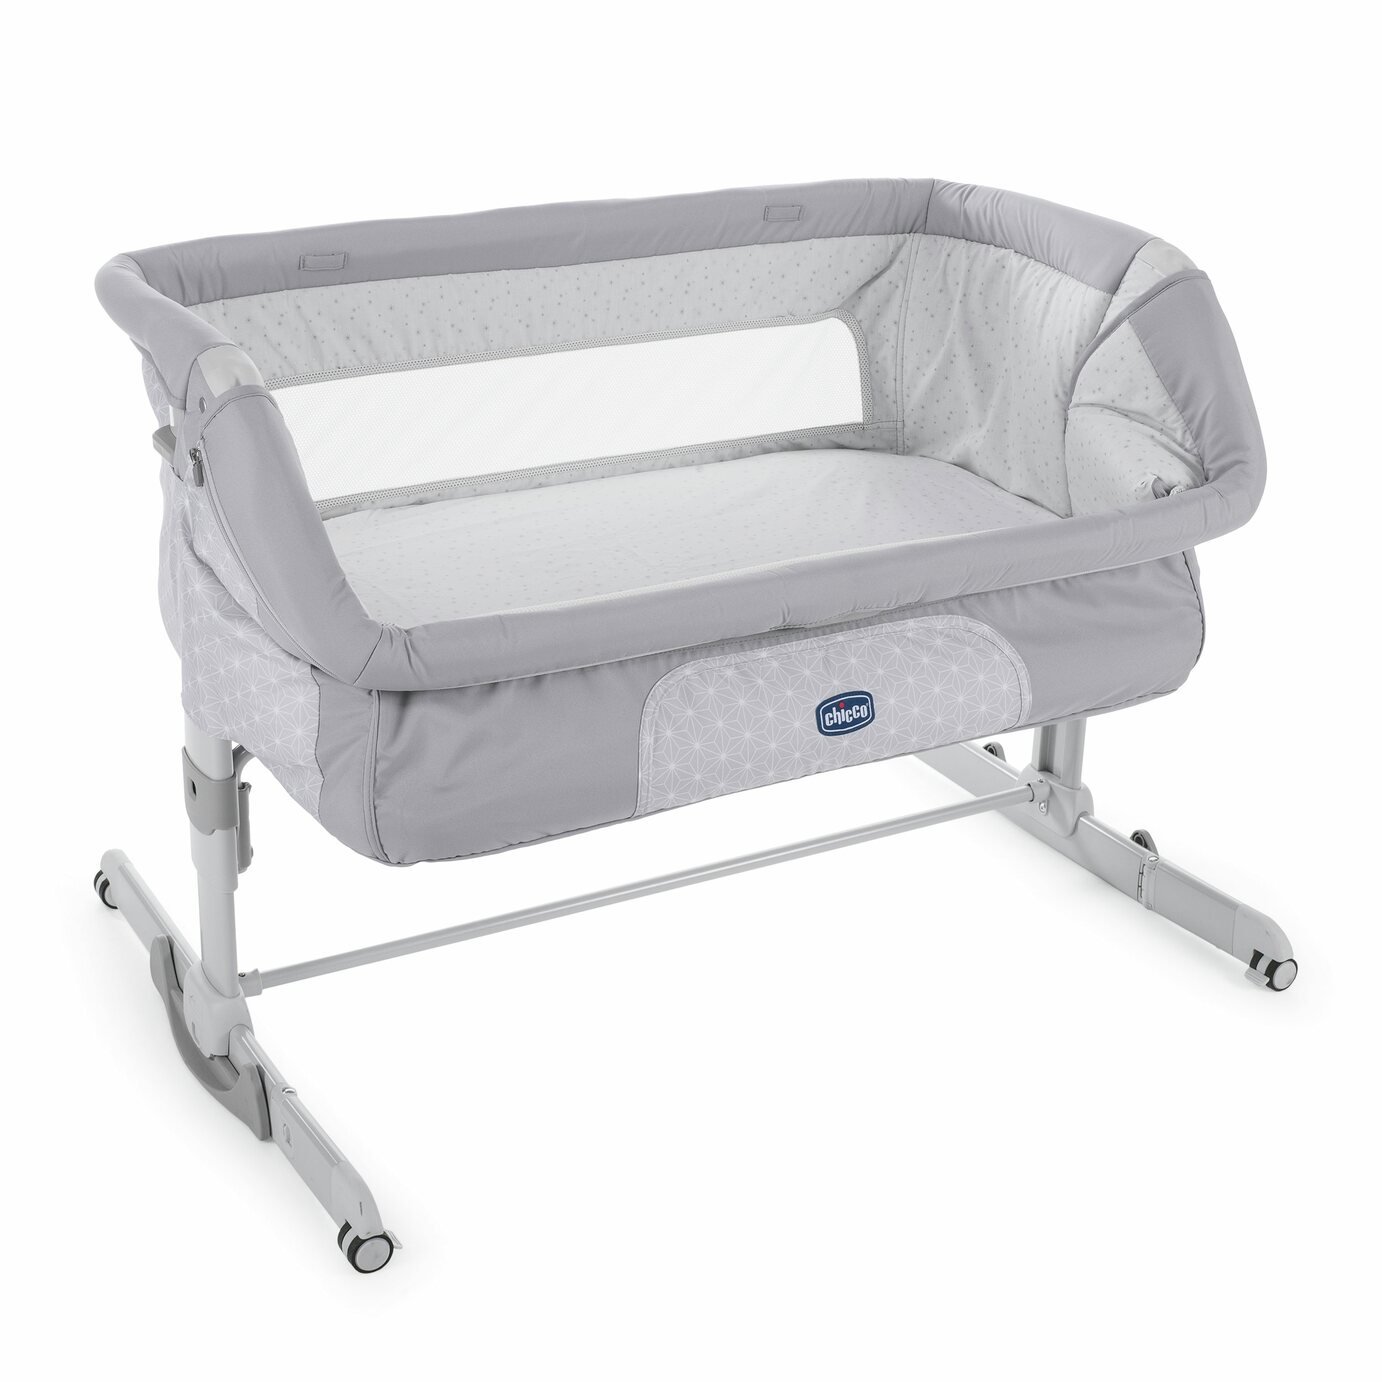 Chicco Next 2 Me Dream Bedside Sleeper Crib Review